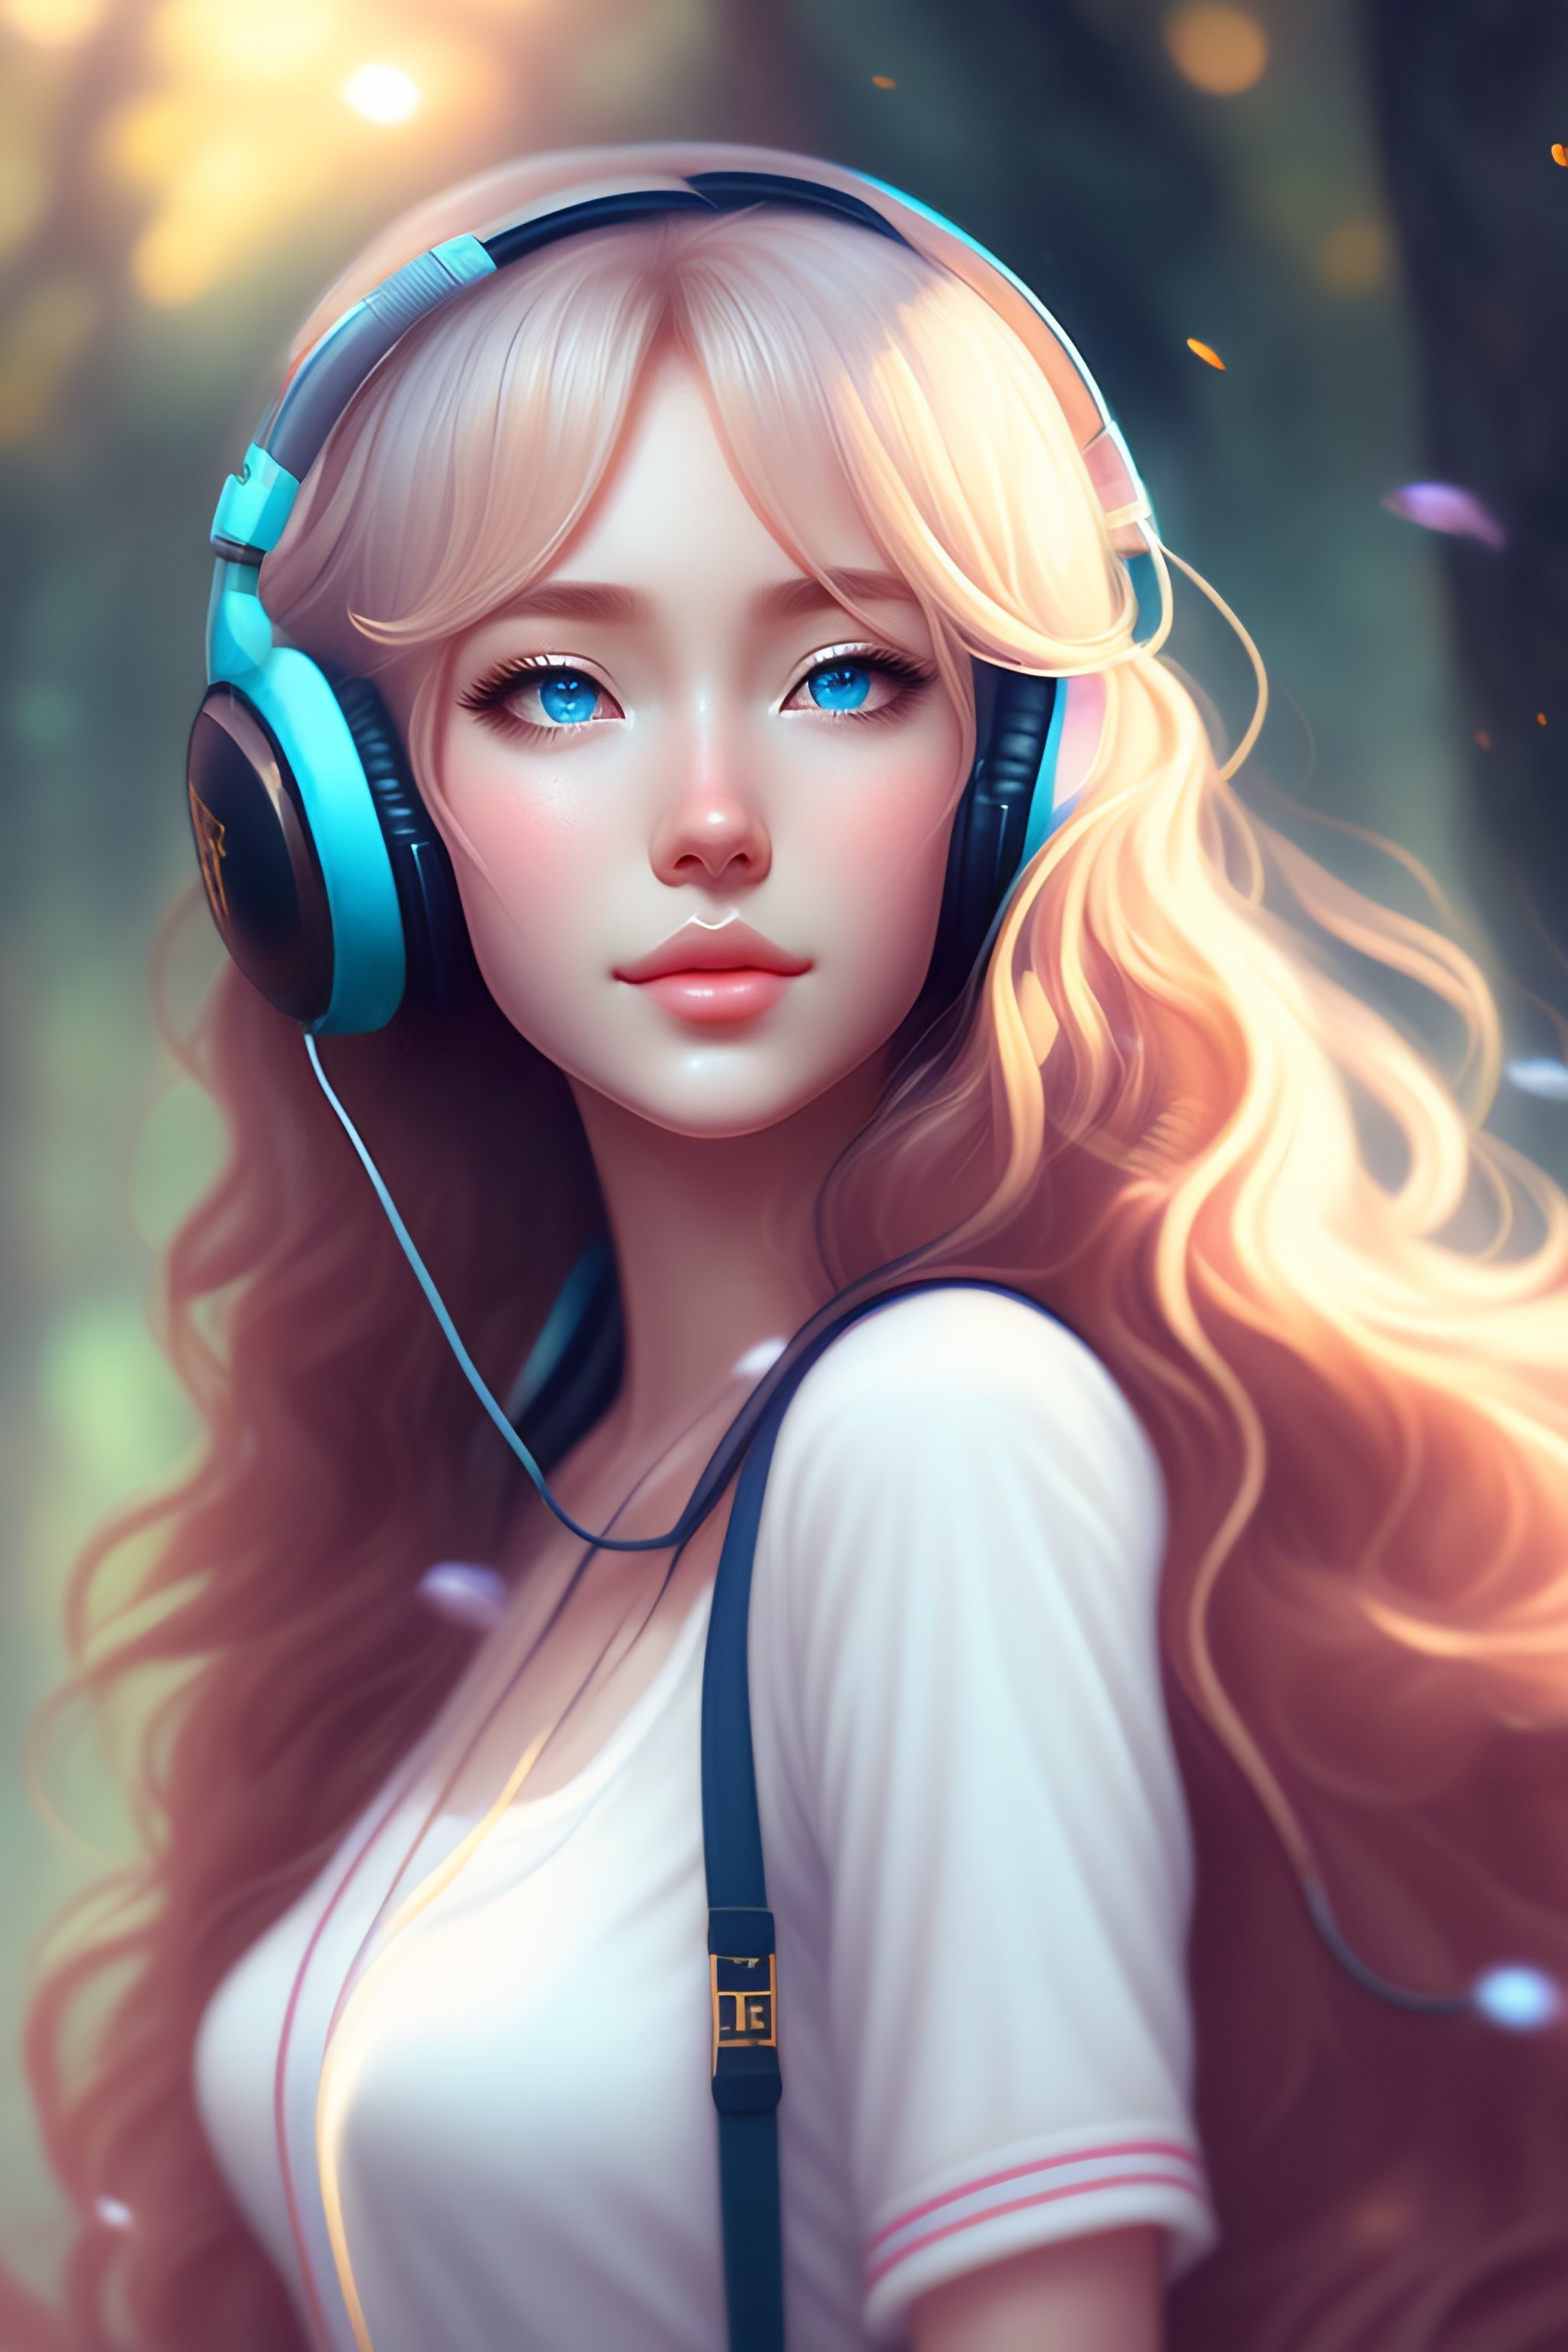 Anime Girl With Brown Hair And Blue Eyes And Headphones